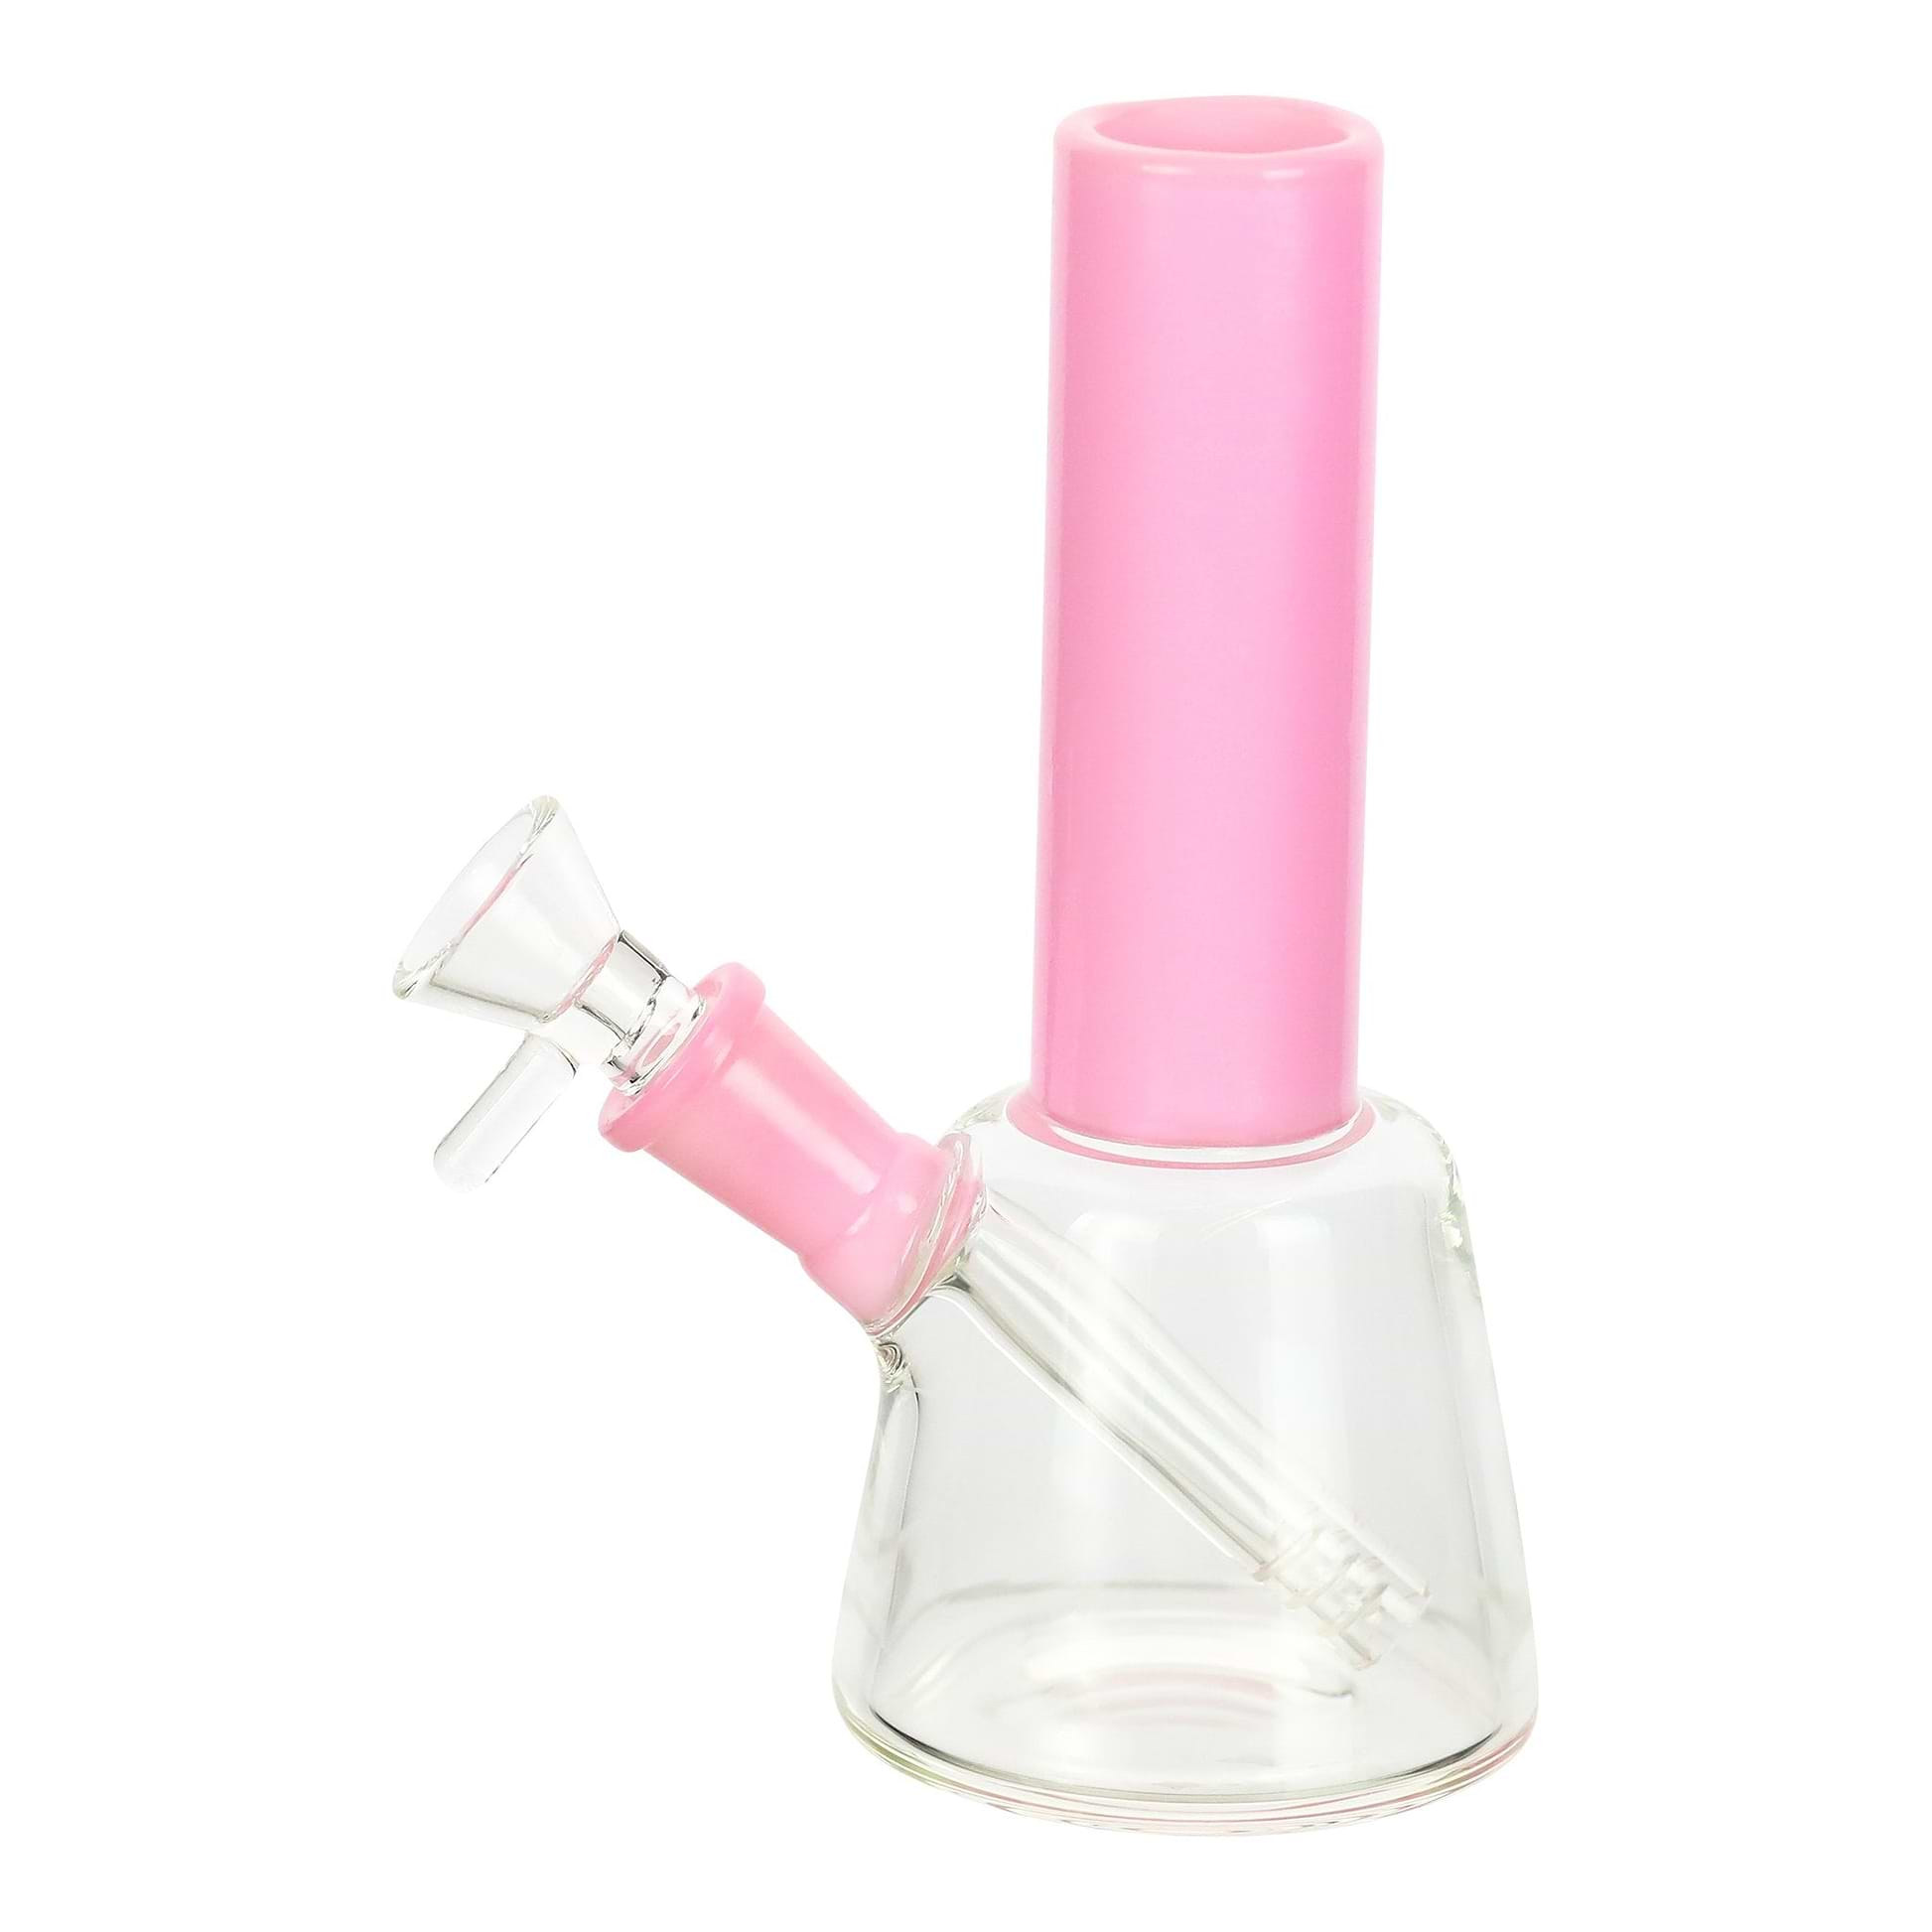 Pink Mod Bong - 7in